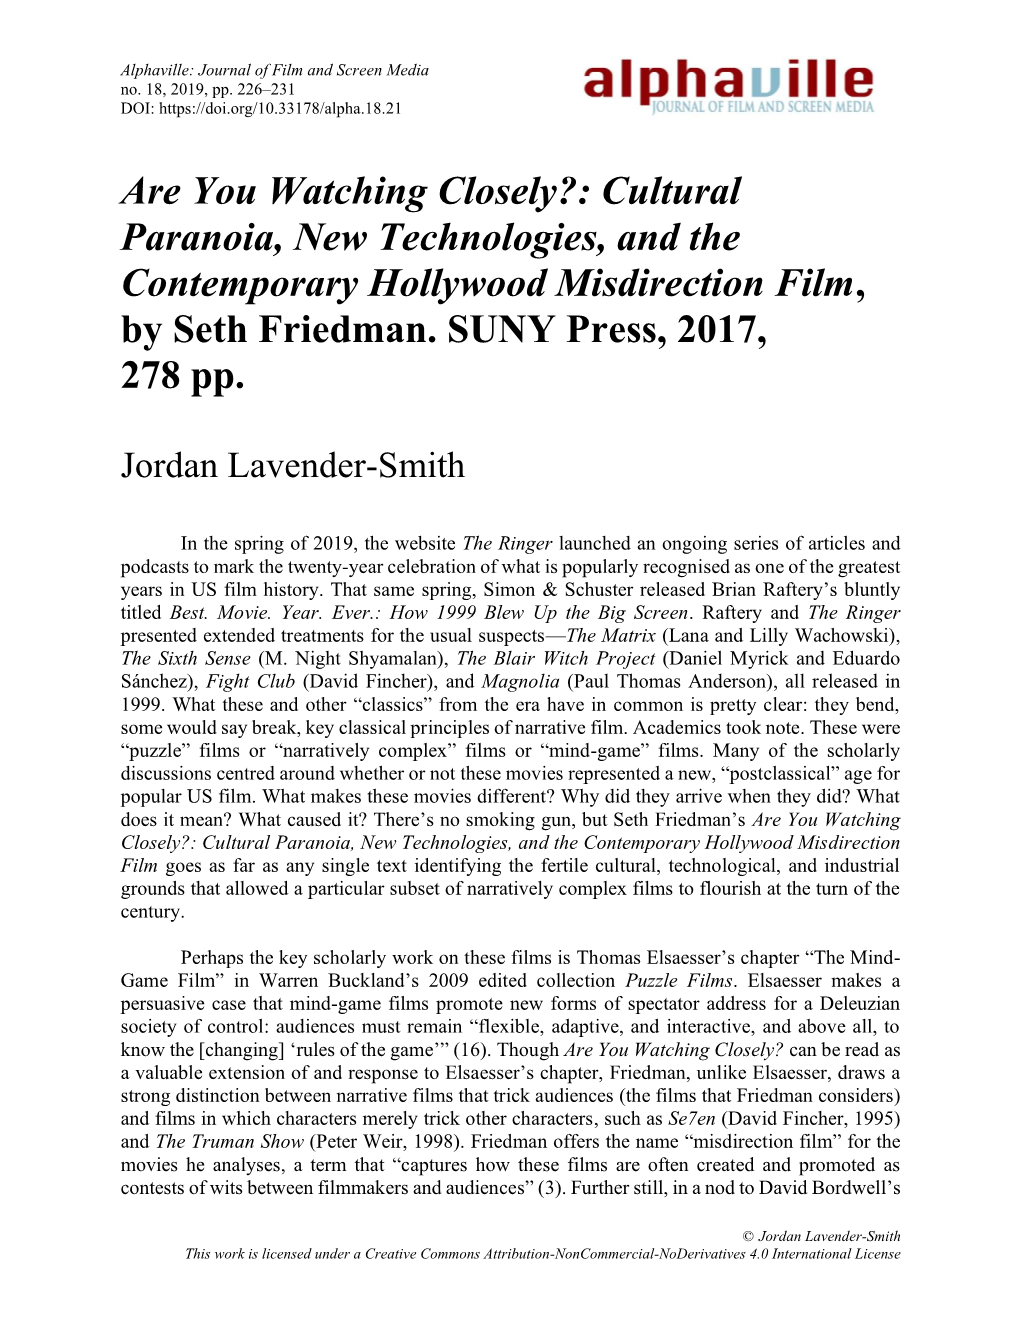 Are You Watching Closely?: Cultural Paranoia, New Technologies, and the Contemporary Hollywood Misdirection Film, by Seth Friedman